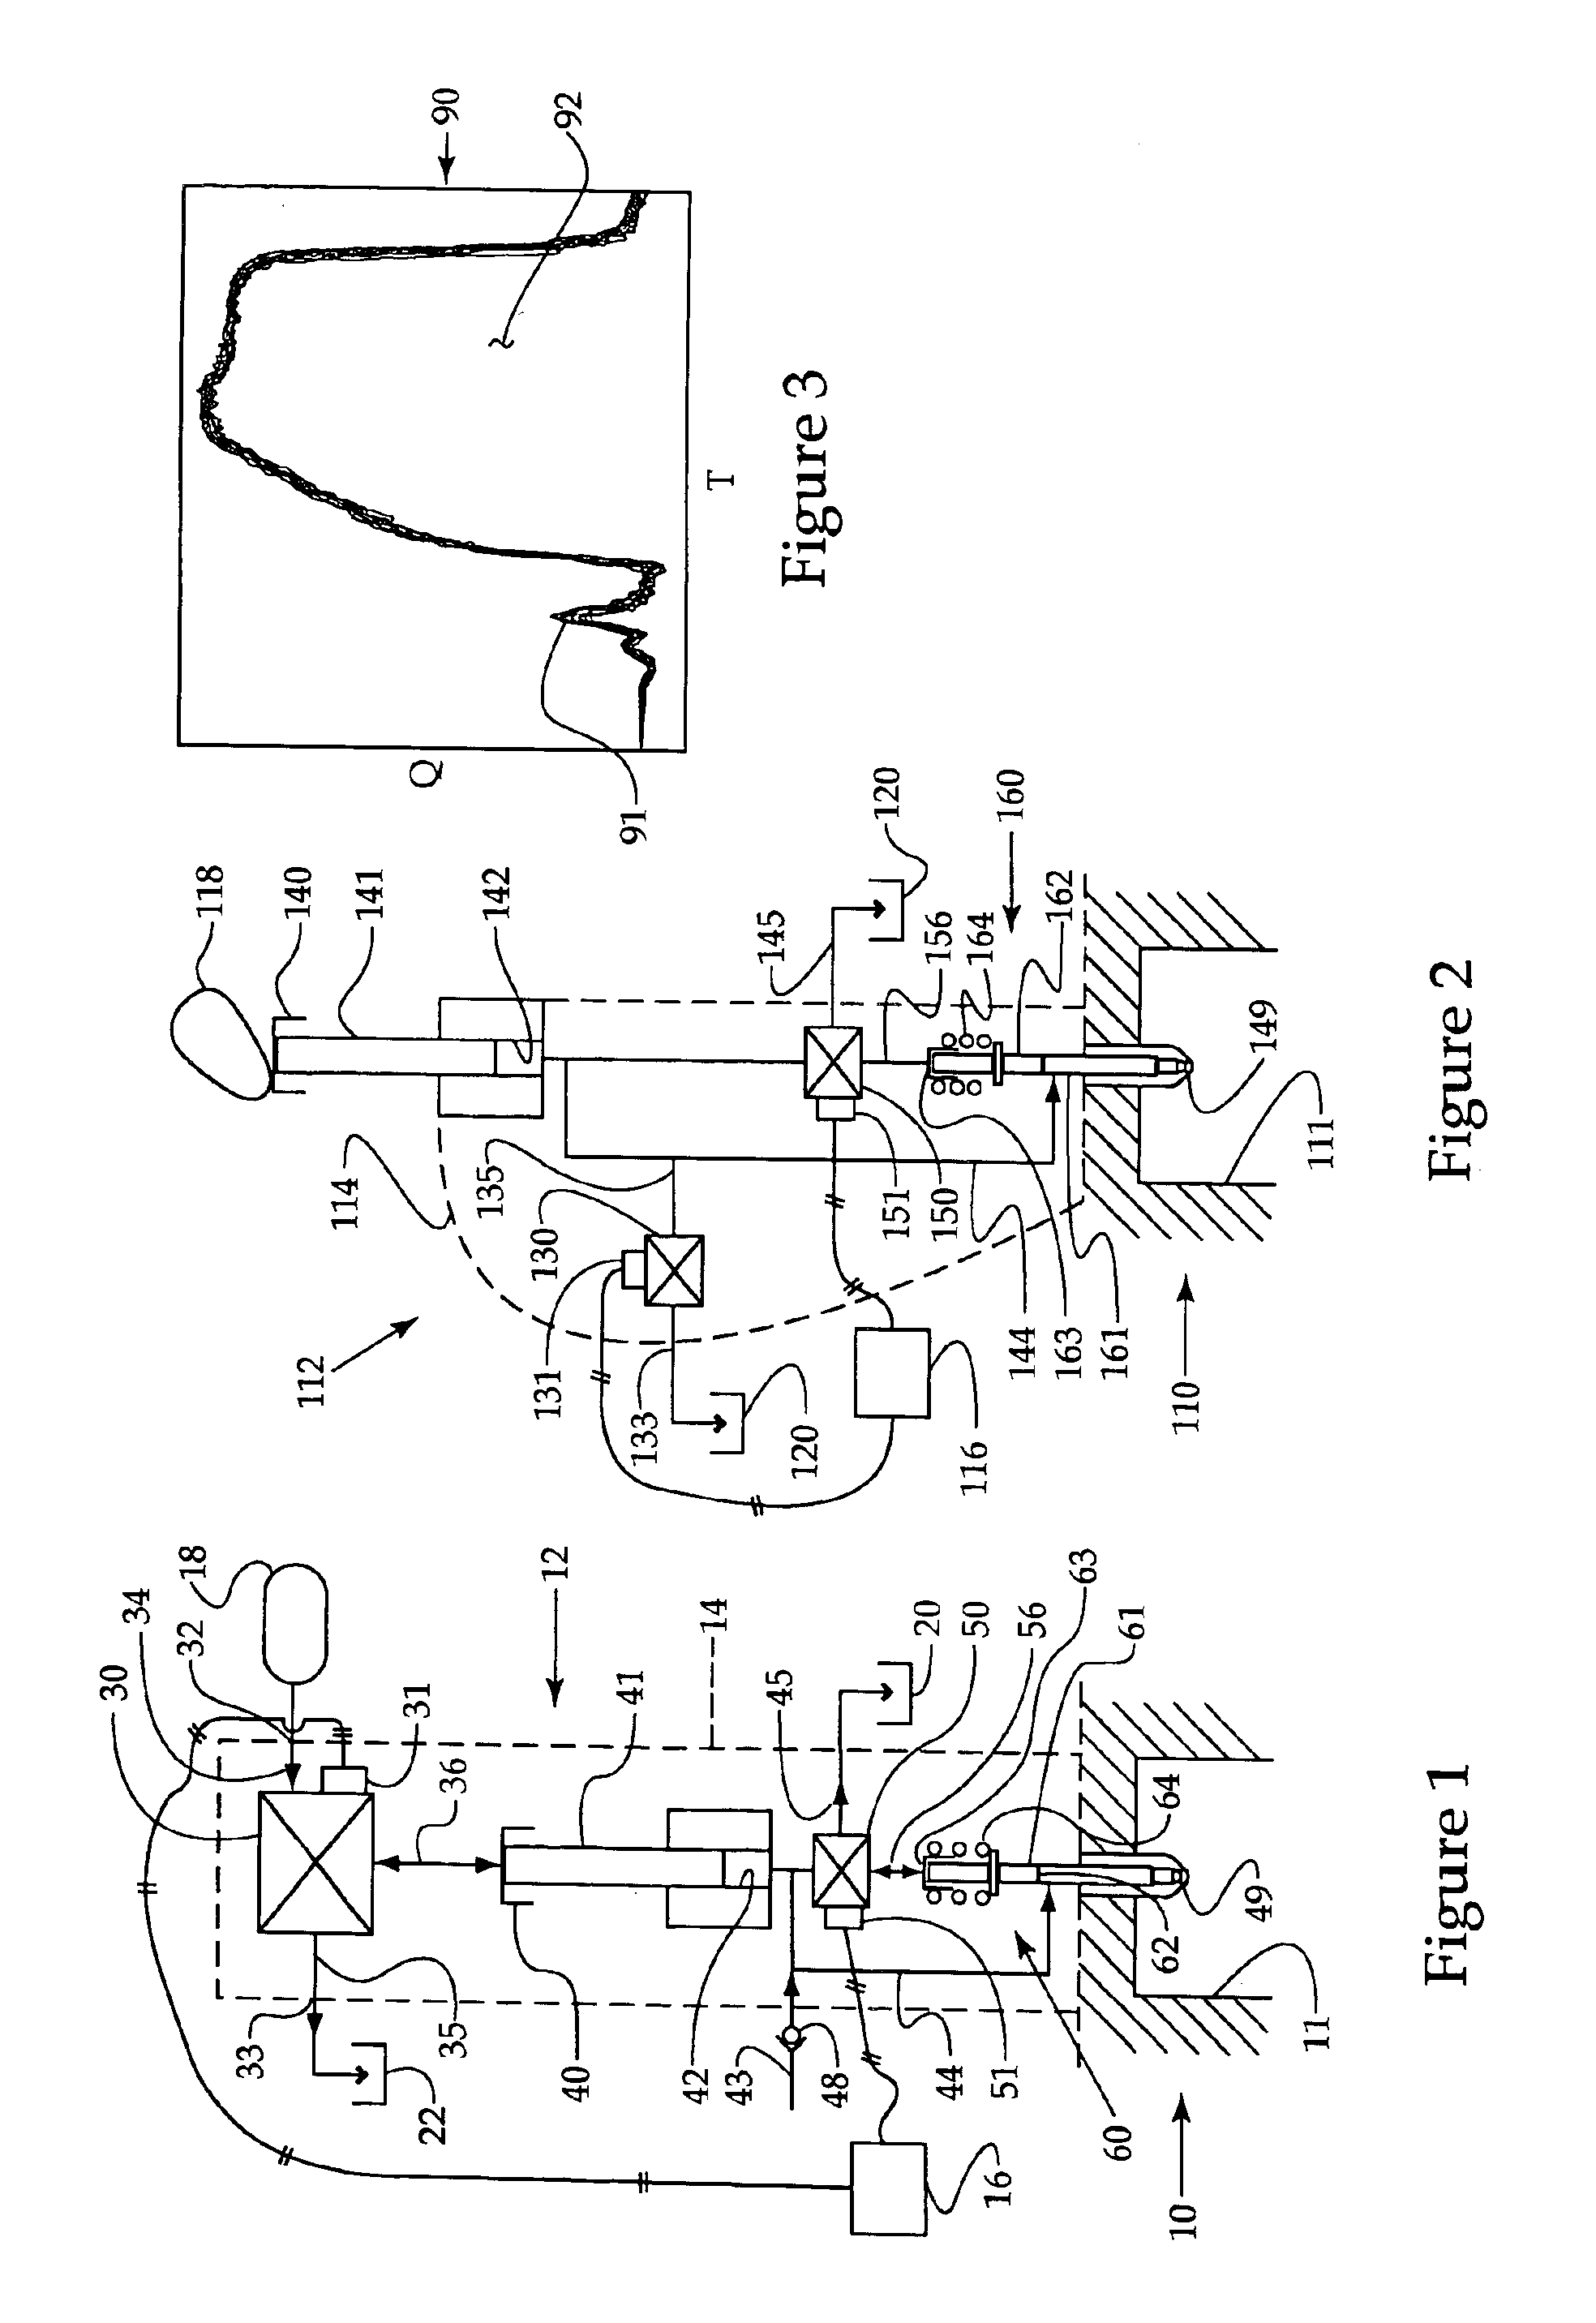 Directly controlled fuel injector with pilot plus main injection sequence capability